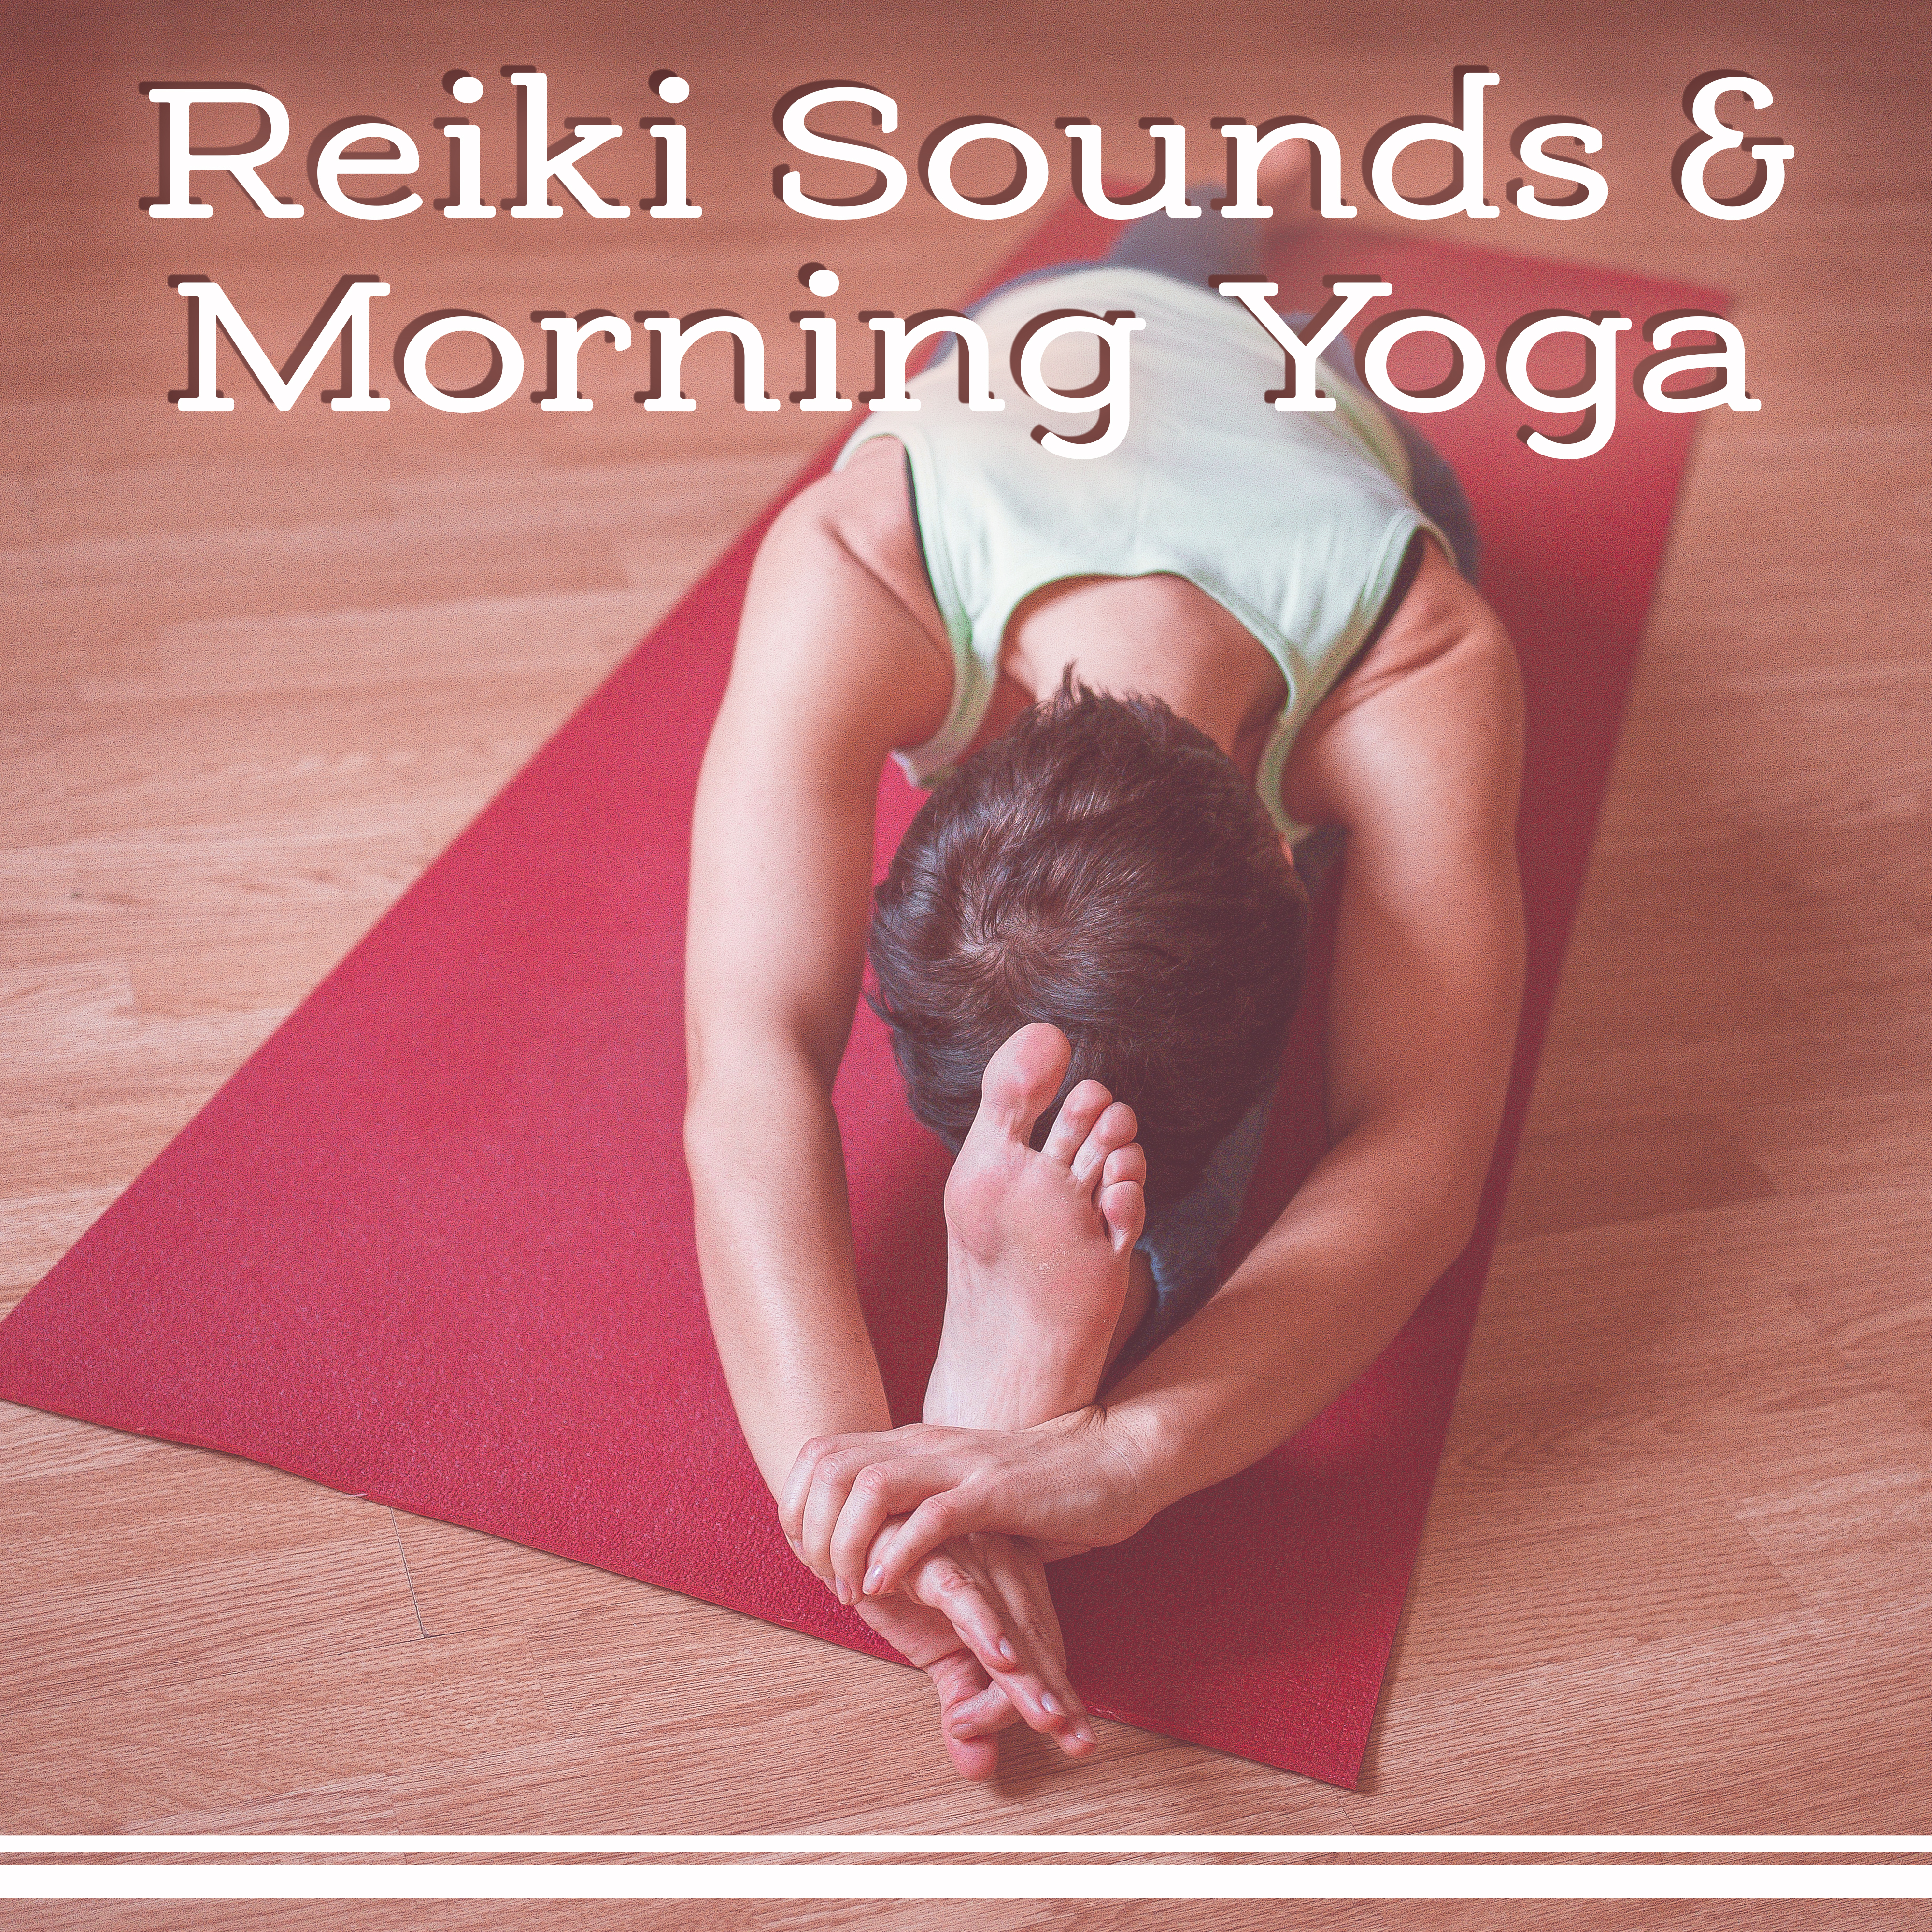 Reiki Sounds  Morning Yoga  Music for Meditation, Harmony for Soul, Healing Melodies, Pure Mind, Exercise Brain